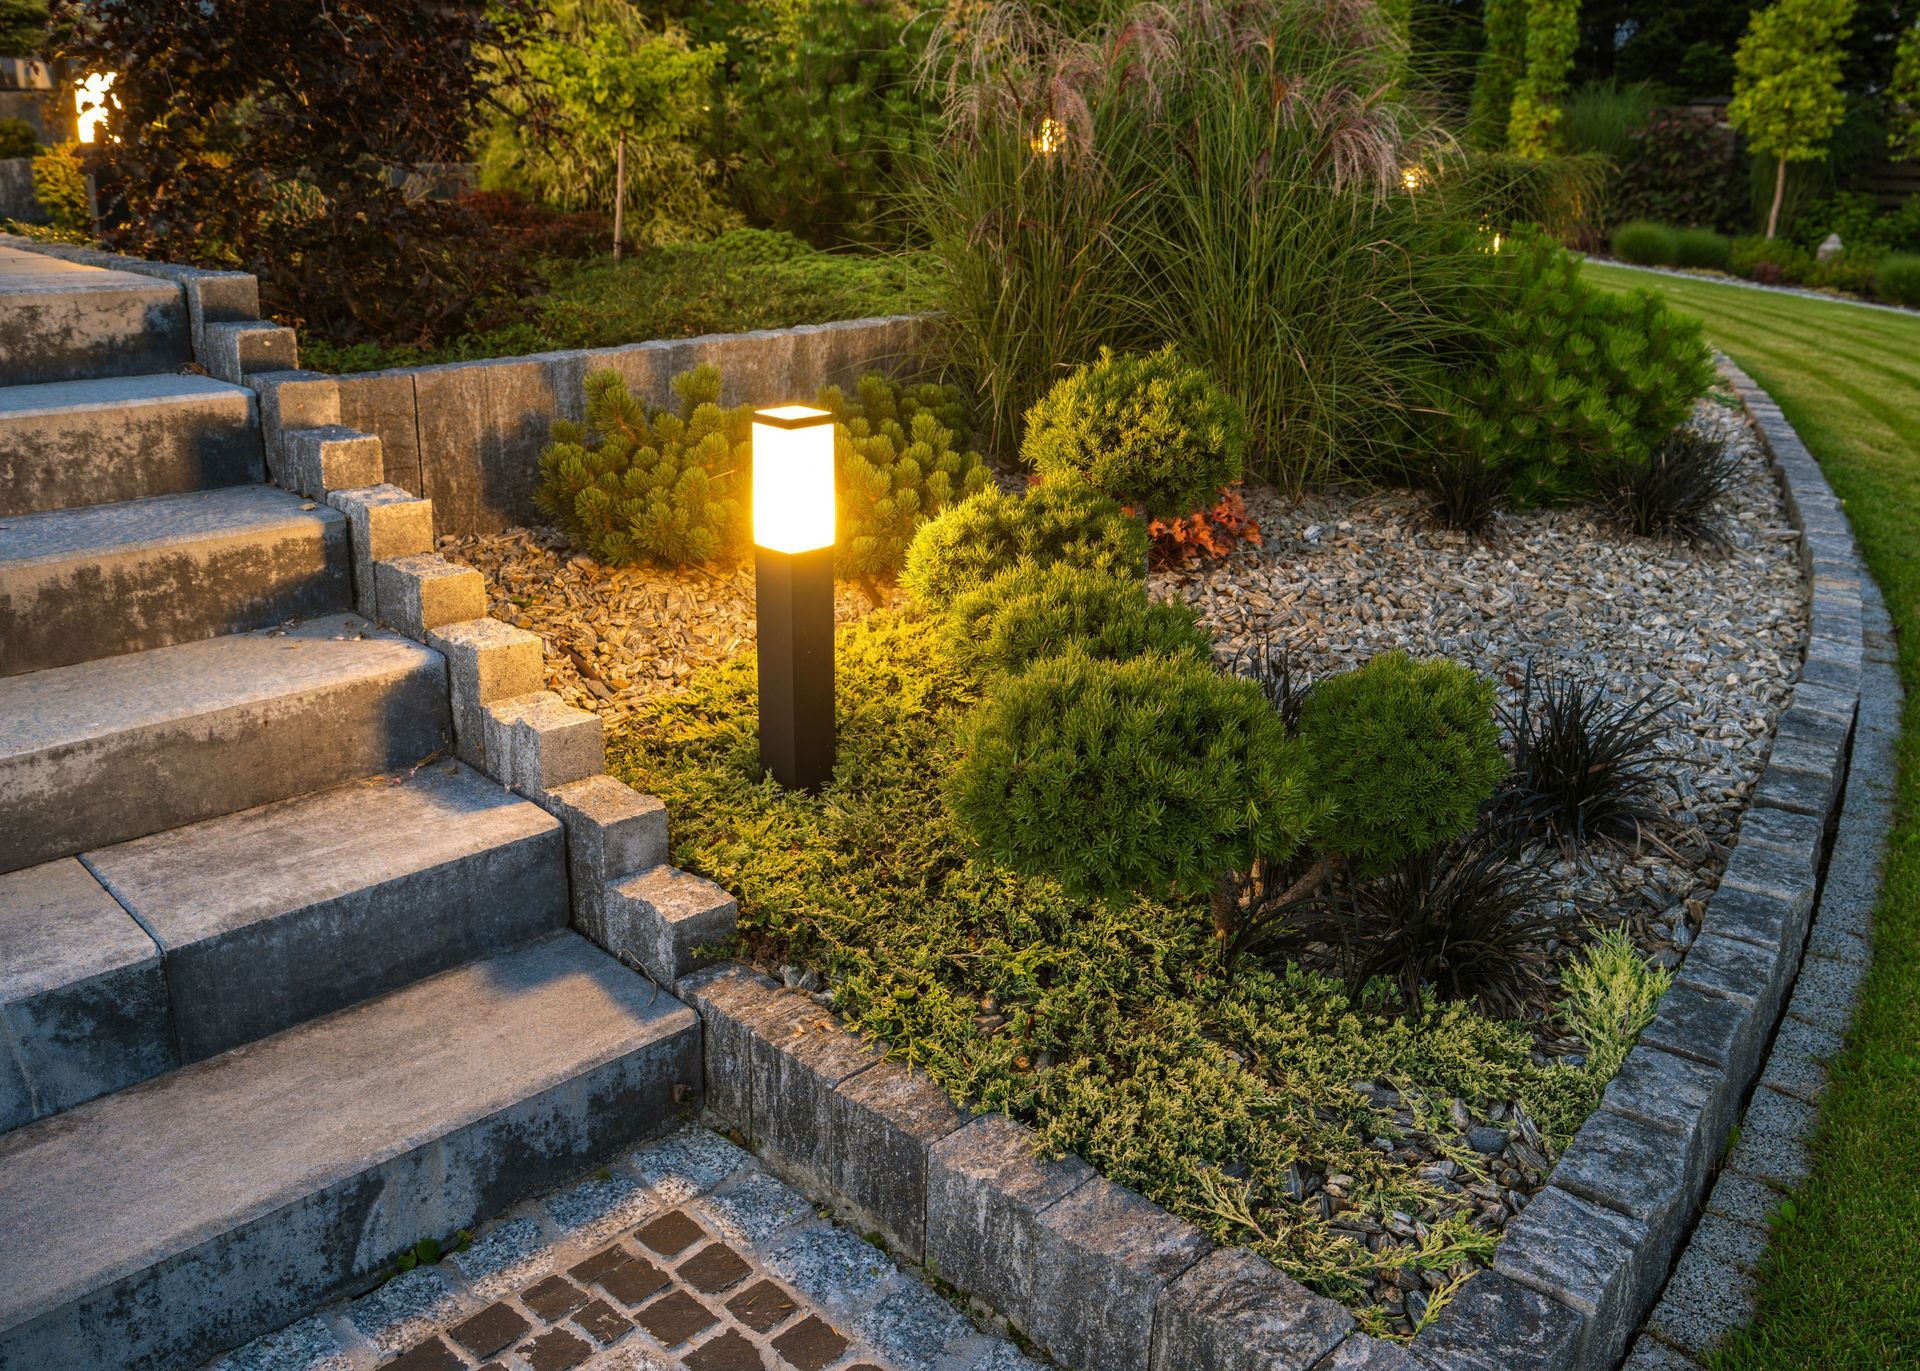 A garden with stairs and a lamp in the middle of it.